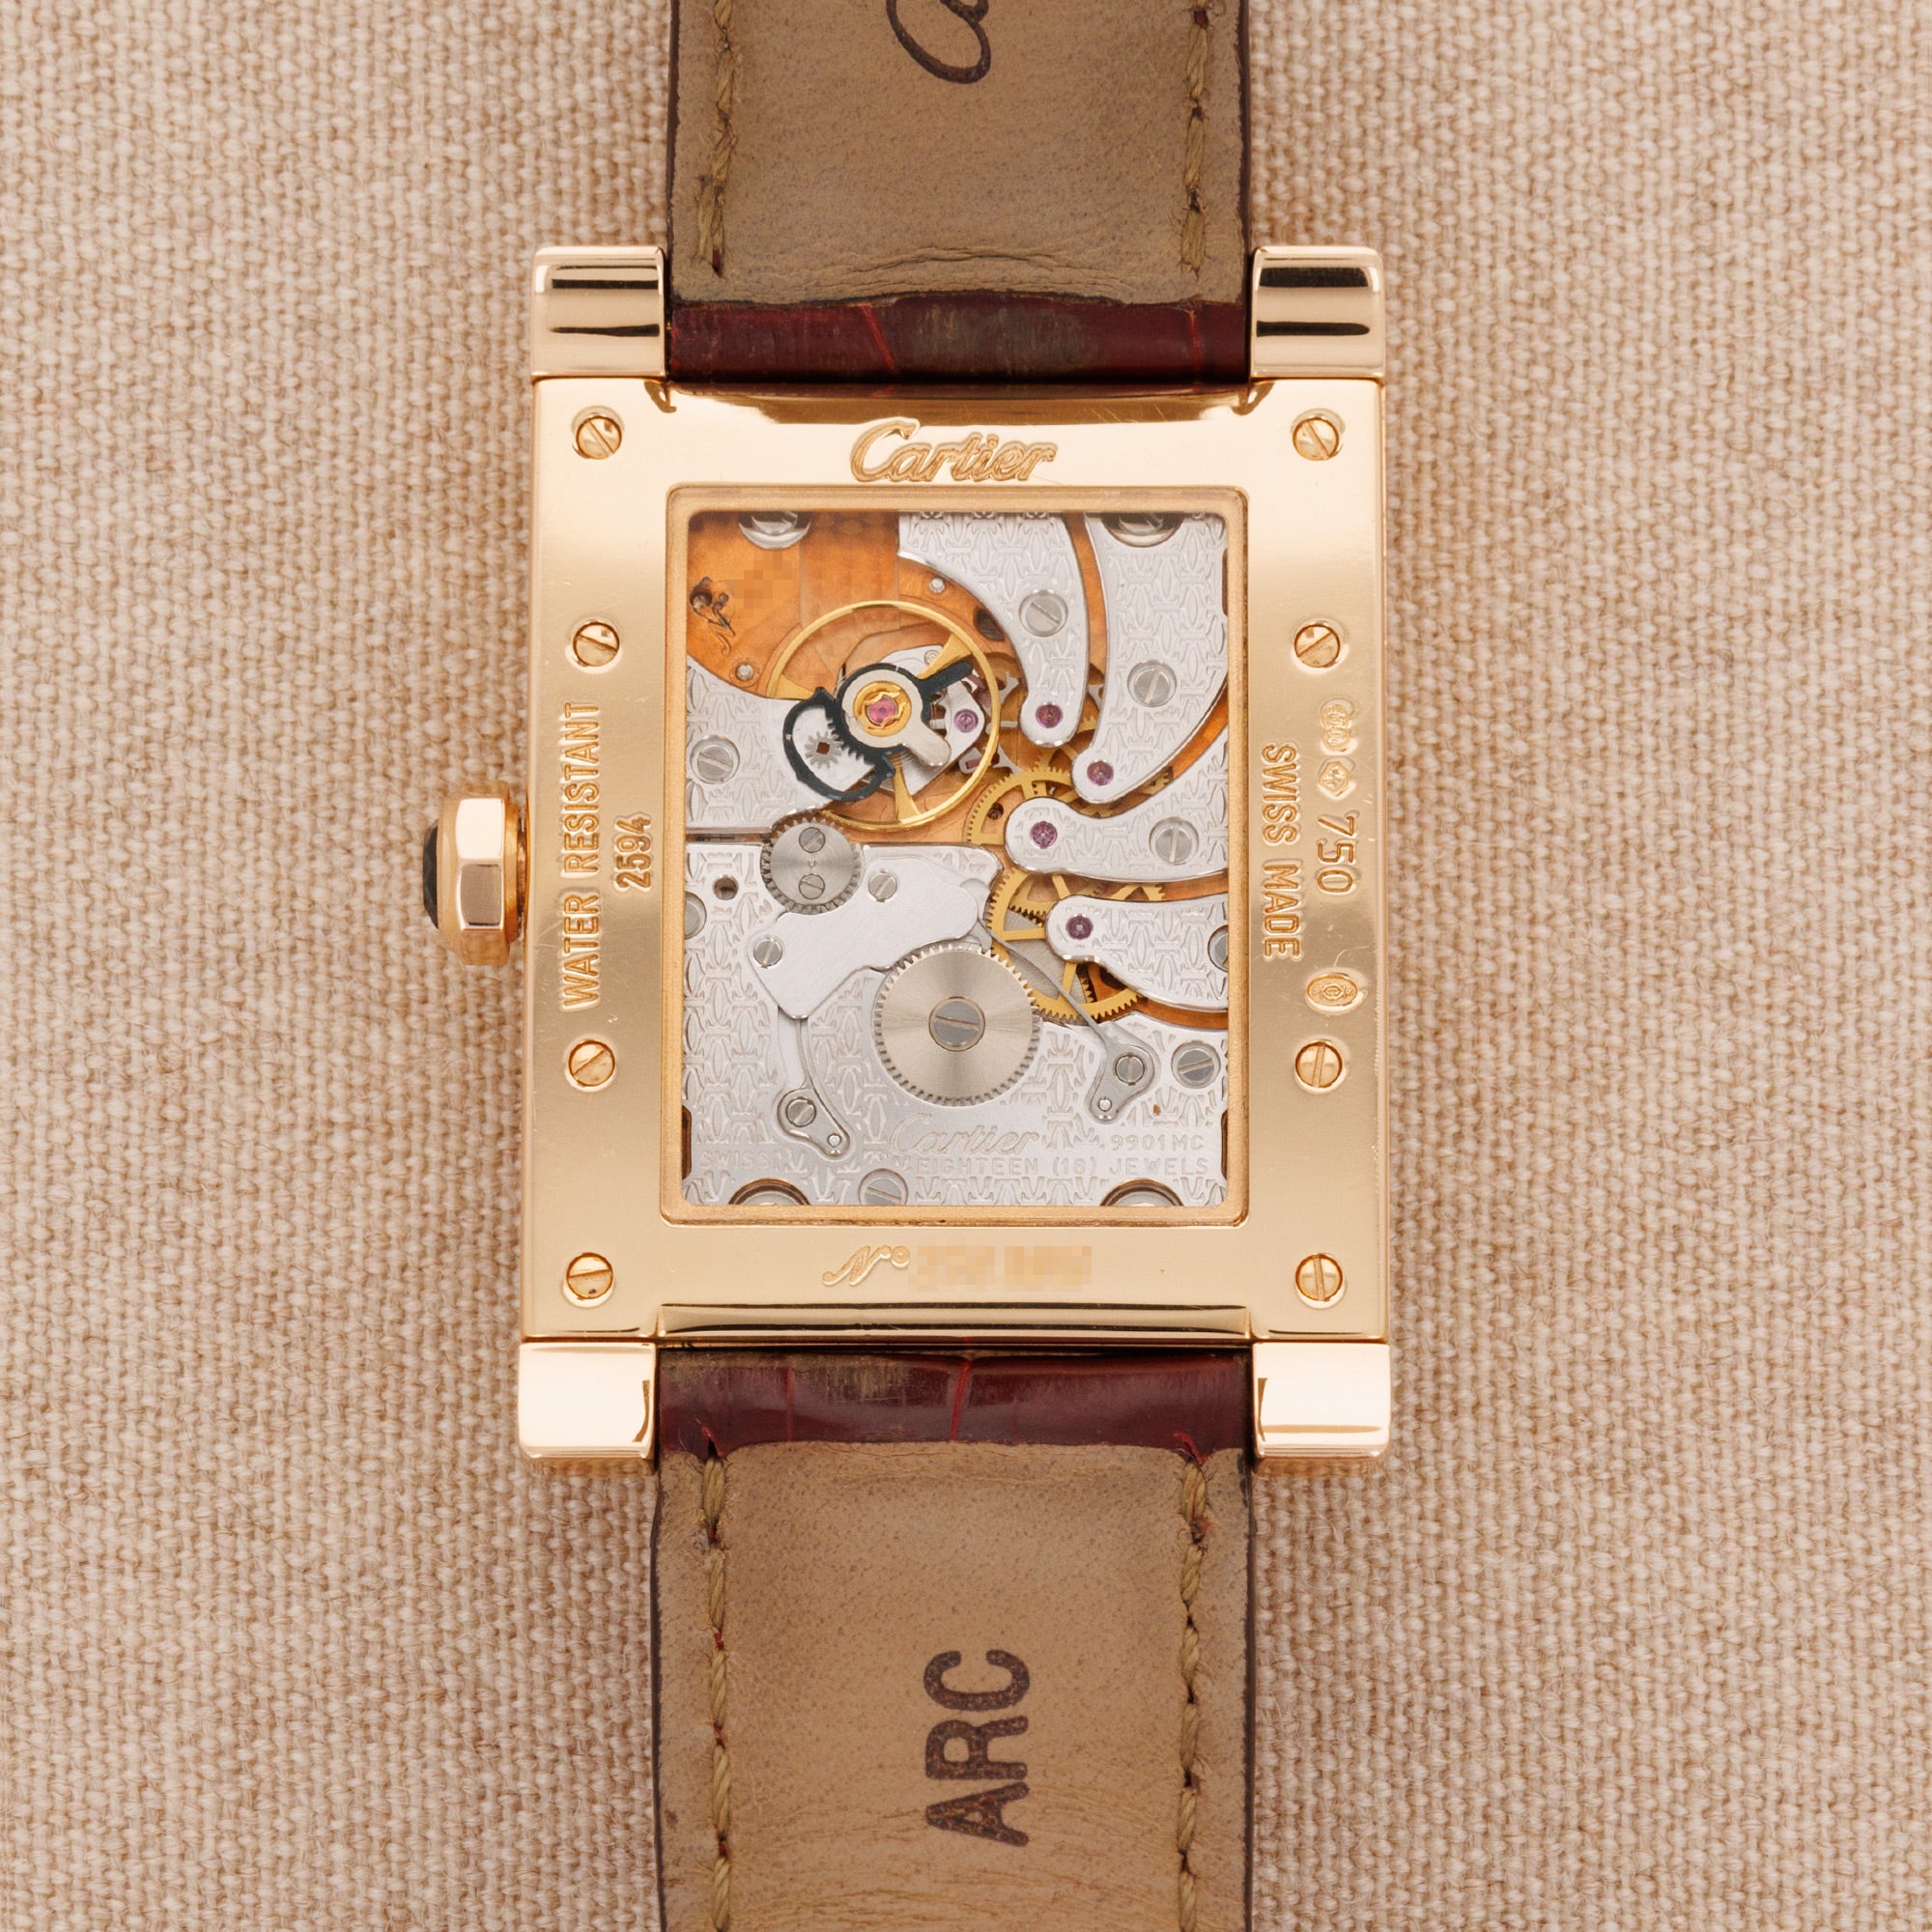 Cartier - Cartier Rose Gold Tank a Vis Dual Time Ref. 2594 - The Keystone Watches